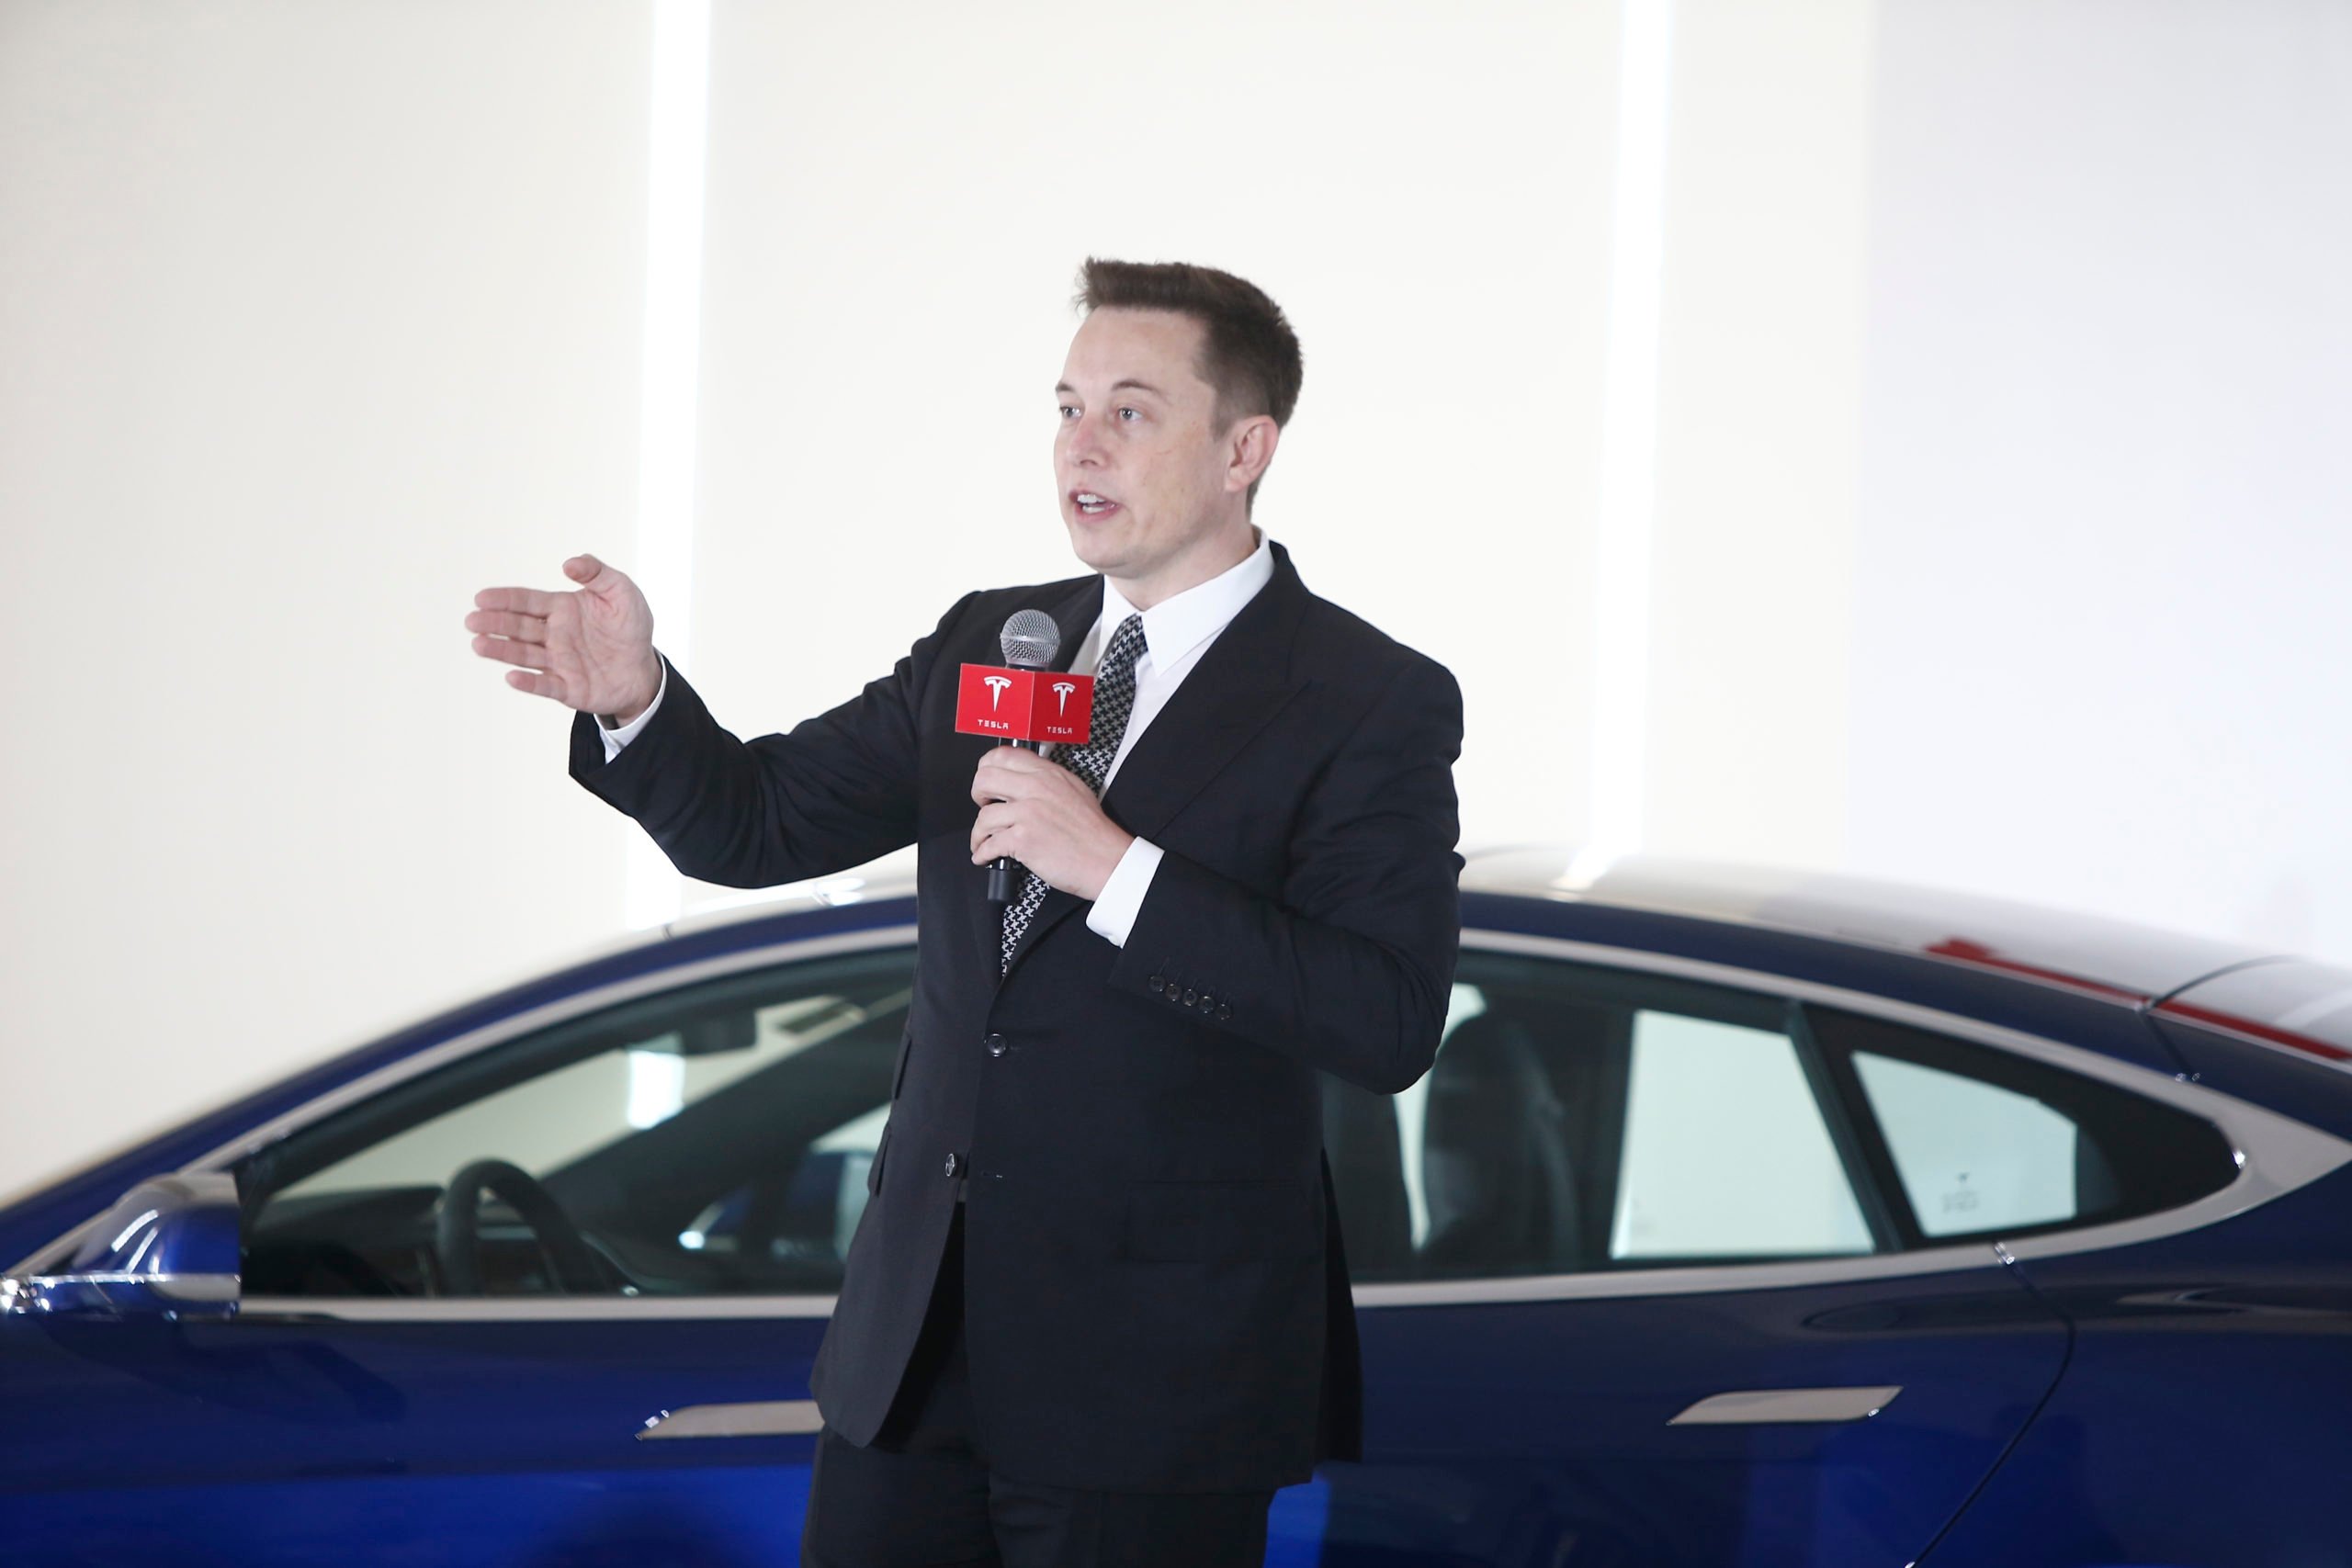 BEIJING, CHINA - OCTOBER 23: (CHINA OUT) Elon Musk, Chairman, CEO and Product Architect of Tesla Motors, addresses a press conference to declare that the Tesla Motors releases v7.0 System in China on a limited basis for its Model S, which will enable self-driving features such as Autosteer for a select group of beta testers on October 23, 2015 in Beijing, China. The v7.0 system includes Autosteer, a new Autopilot feature. While it's not absolutely self-driving and the driver still need to hold the steering wheel and be mindful of road conditions and surrounding traffic when using Autosteer. When set to the new Autosteer mode, graphics on the driver's display will show the path the Model S is following, post the current speed limit and indicate if a car is in front of the Tesla. (Photo by VCG/VCG via Getty Images)